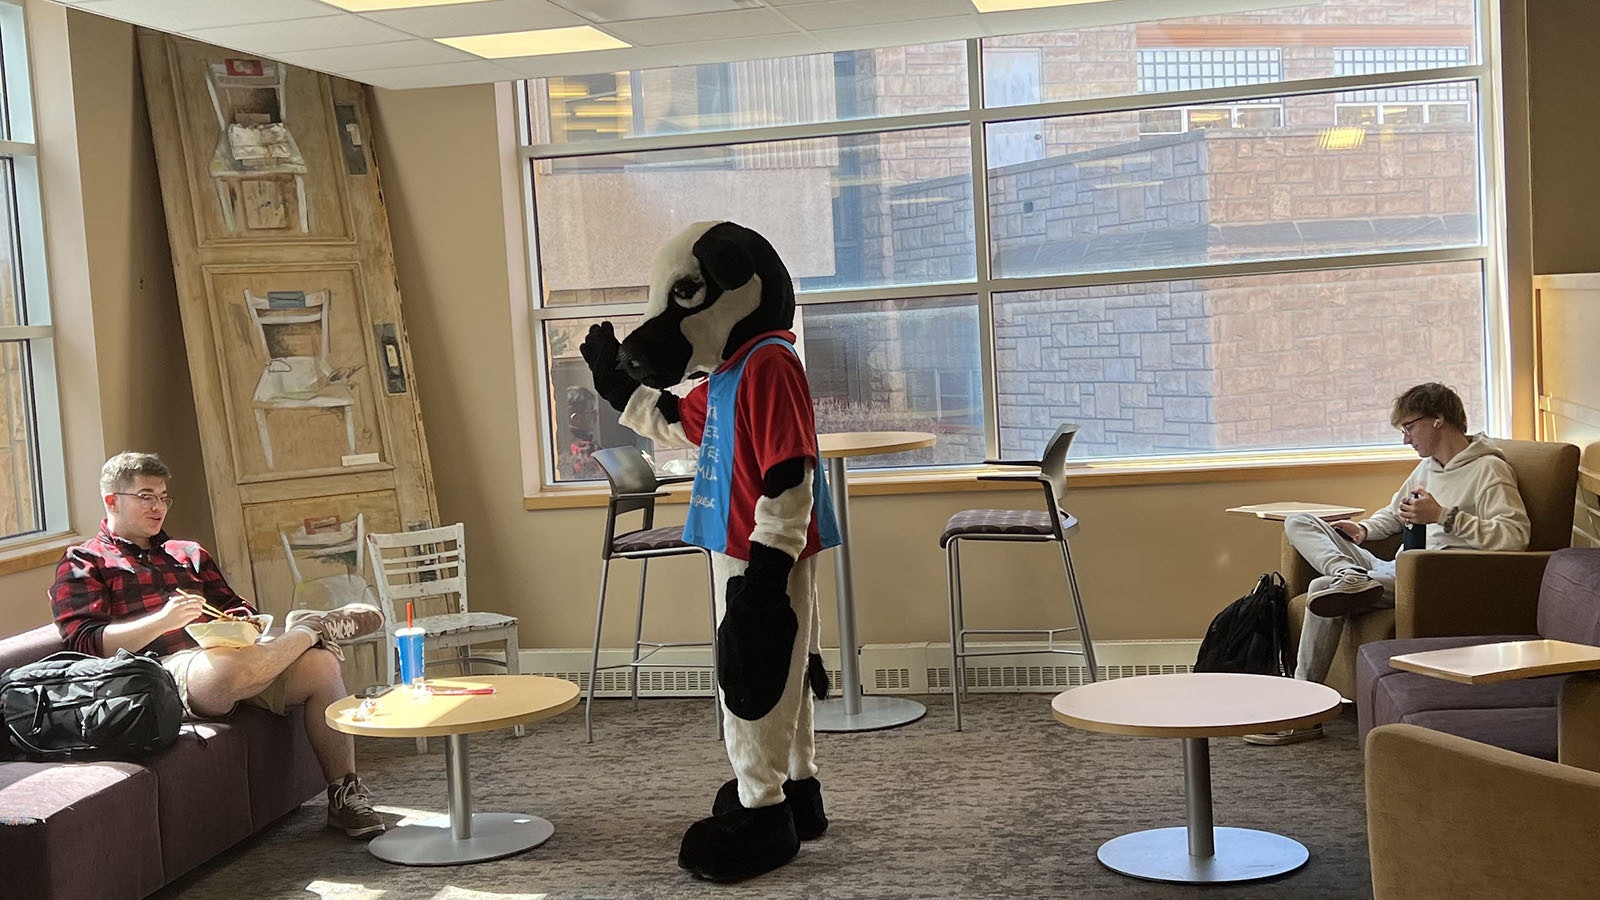 The Chick-Fil-A cow mascot chides someone for eating Panda Express instead of Chick-Fil-A in the University of Wyoming Union on Thursday.